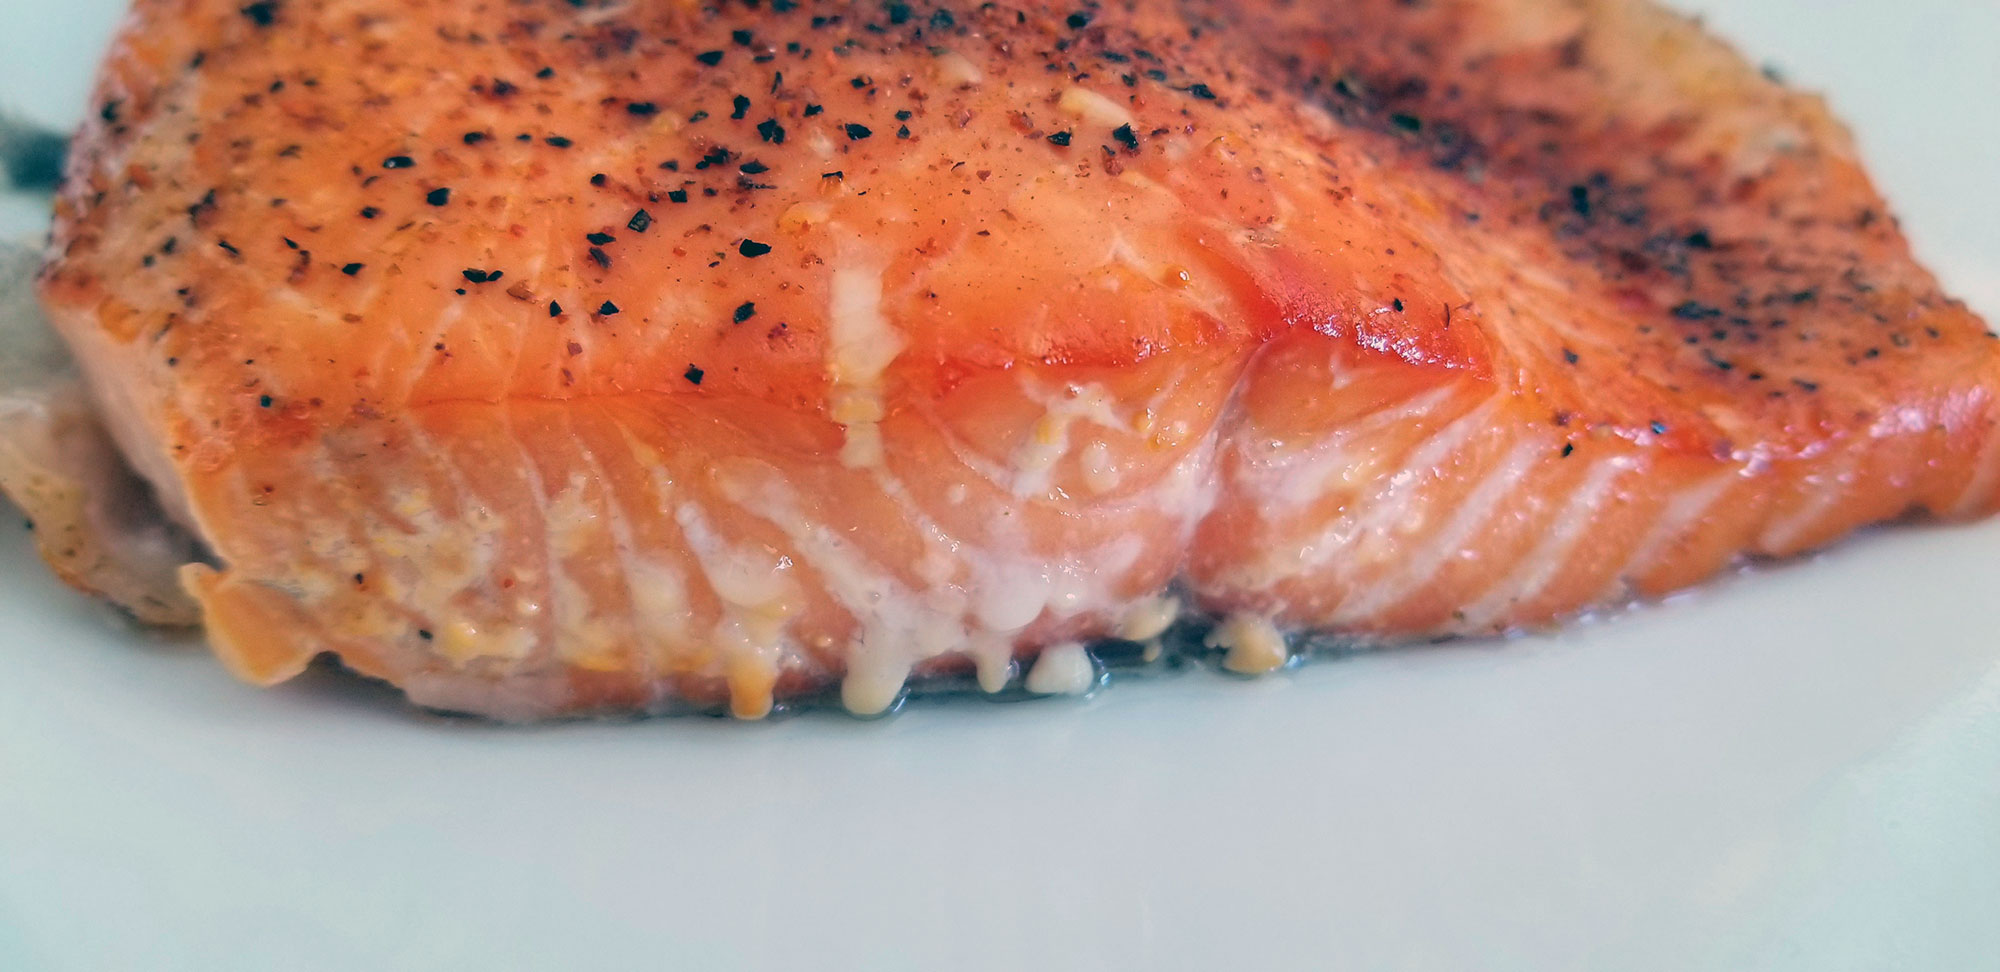 Cooked_Salmon_side • Edel Alon